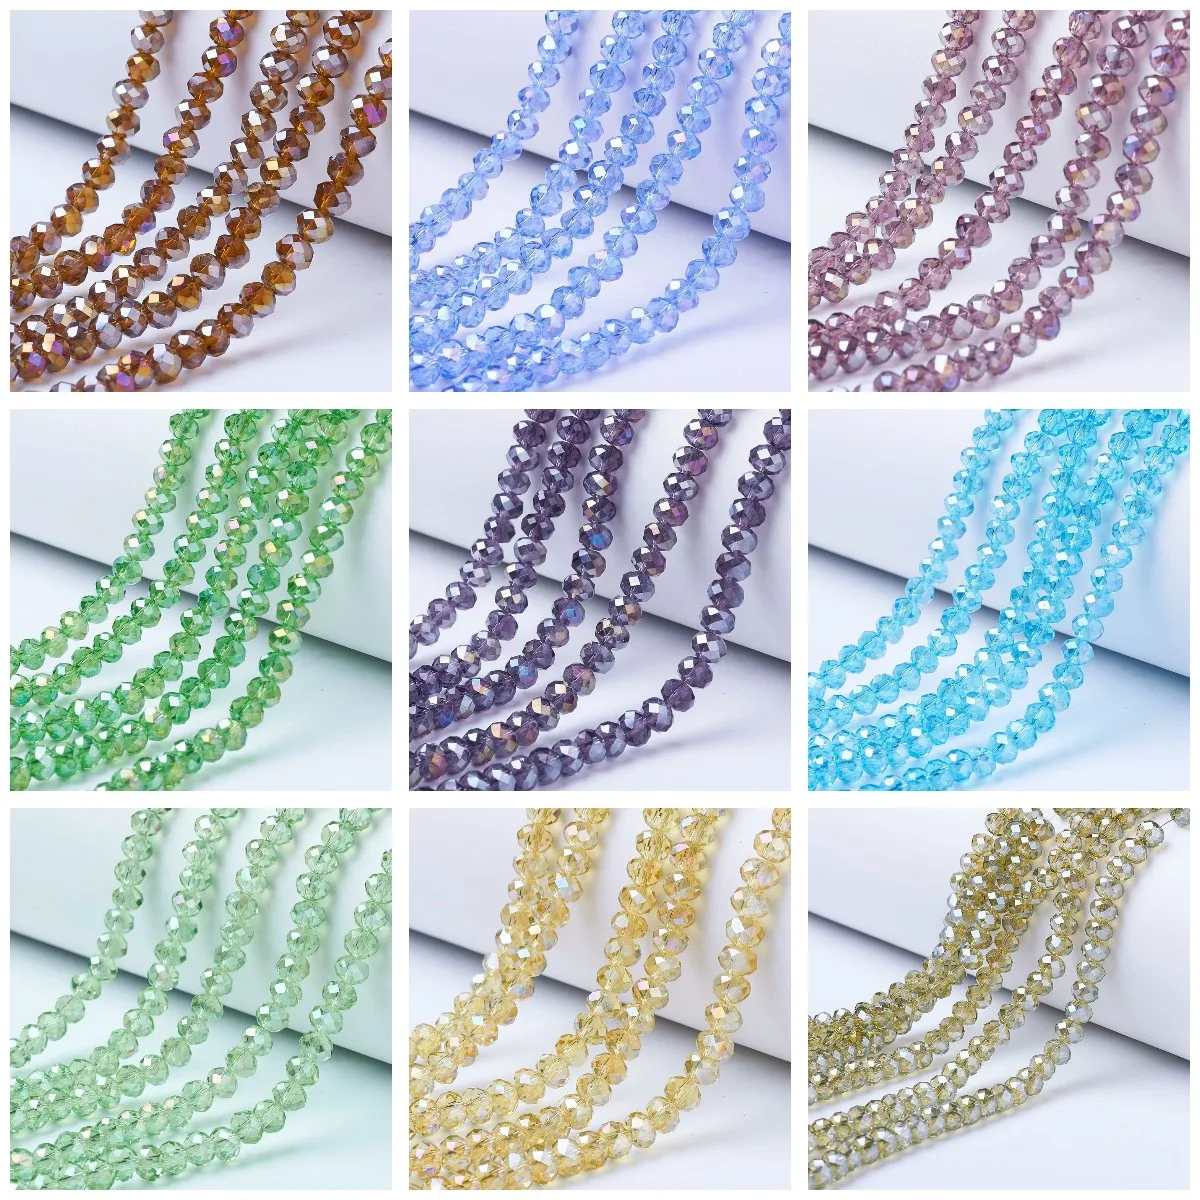 

10 Strands 4mm/6mm/8mm Faceted Glass Beads Transparent AB Crystal Rondelle Bead For Bracelet Necklace DIY Jewelry Making